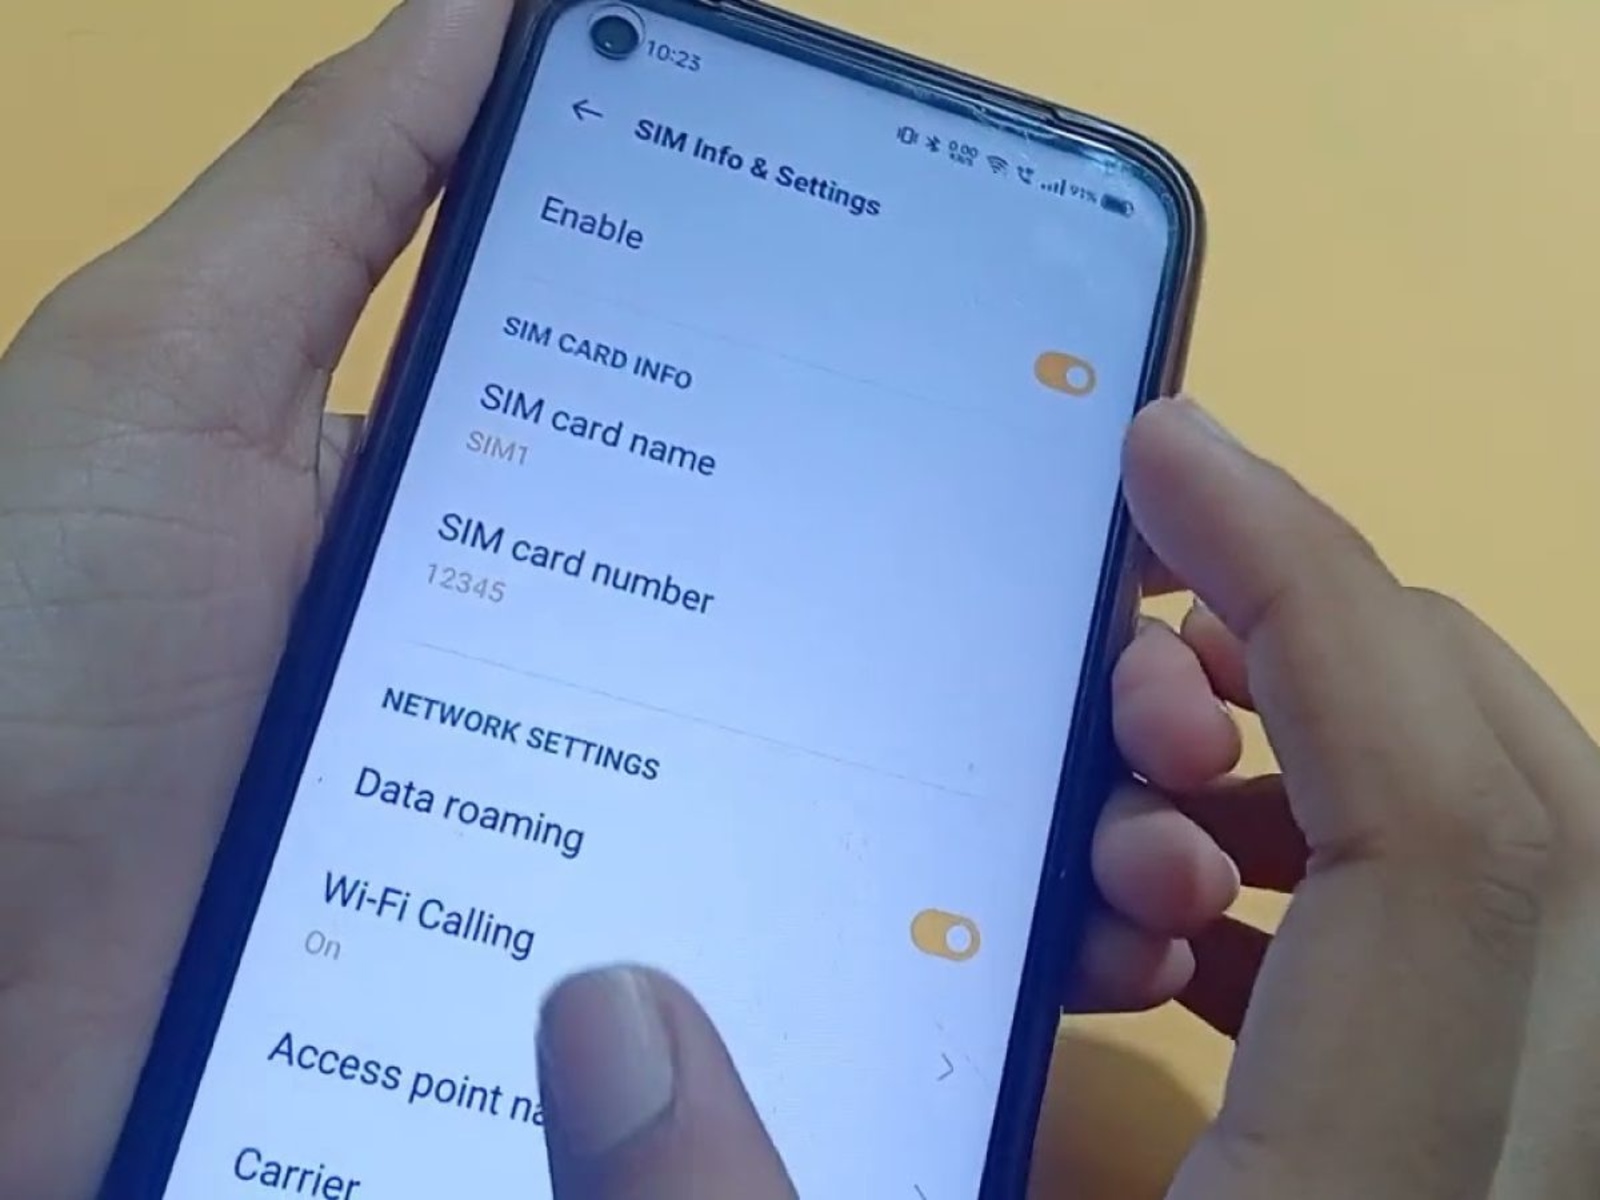 Stay Connected Anywhere: Enabling Data Roaming On Realme